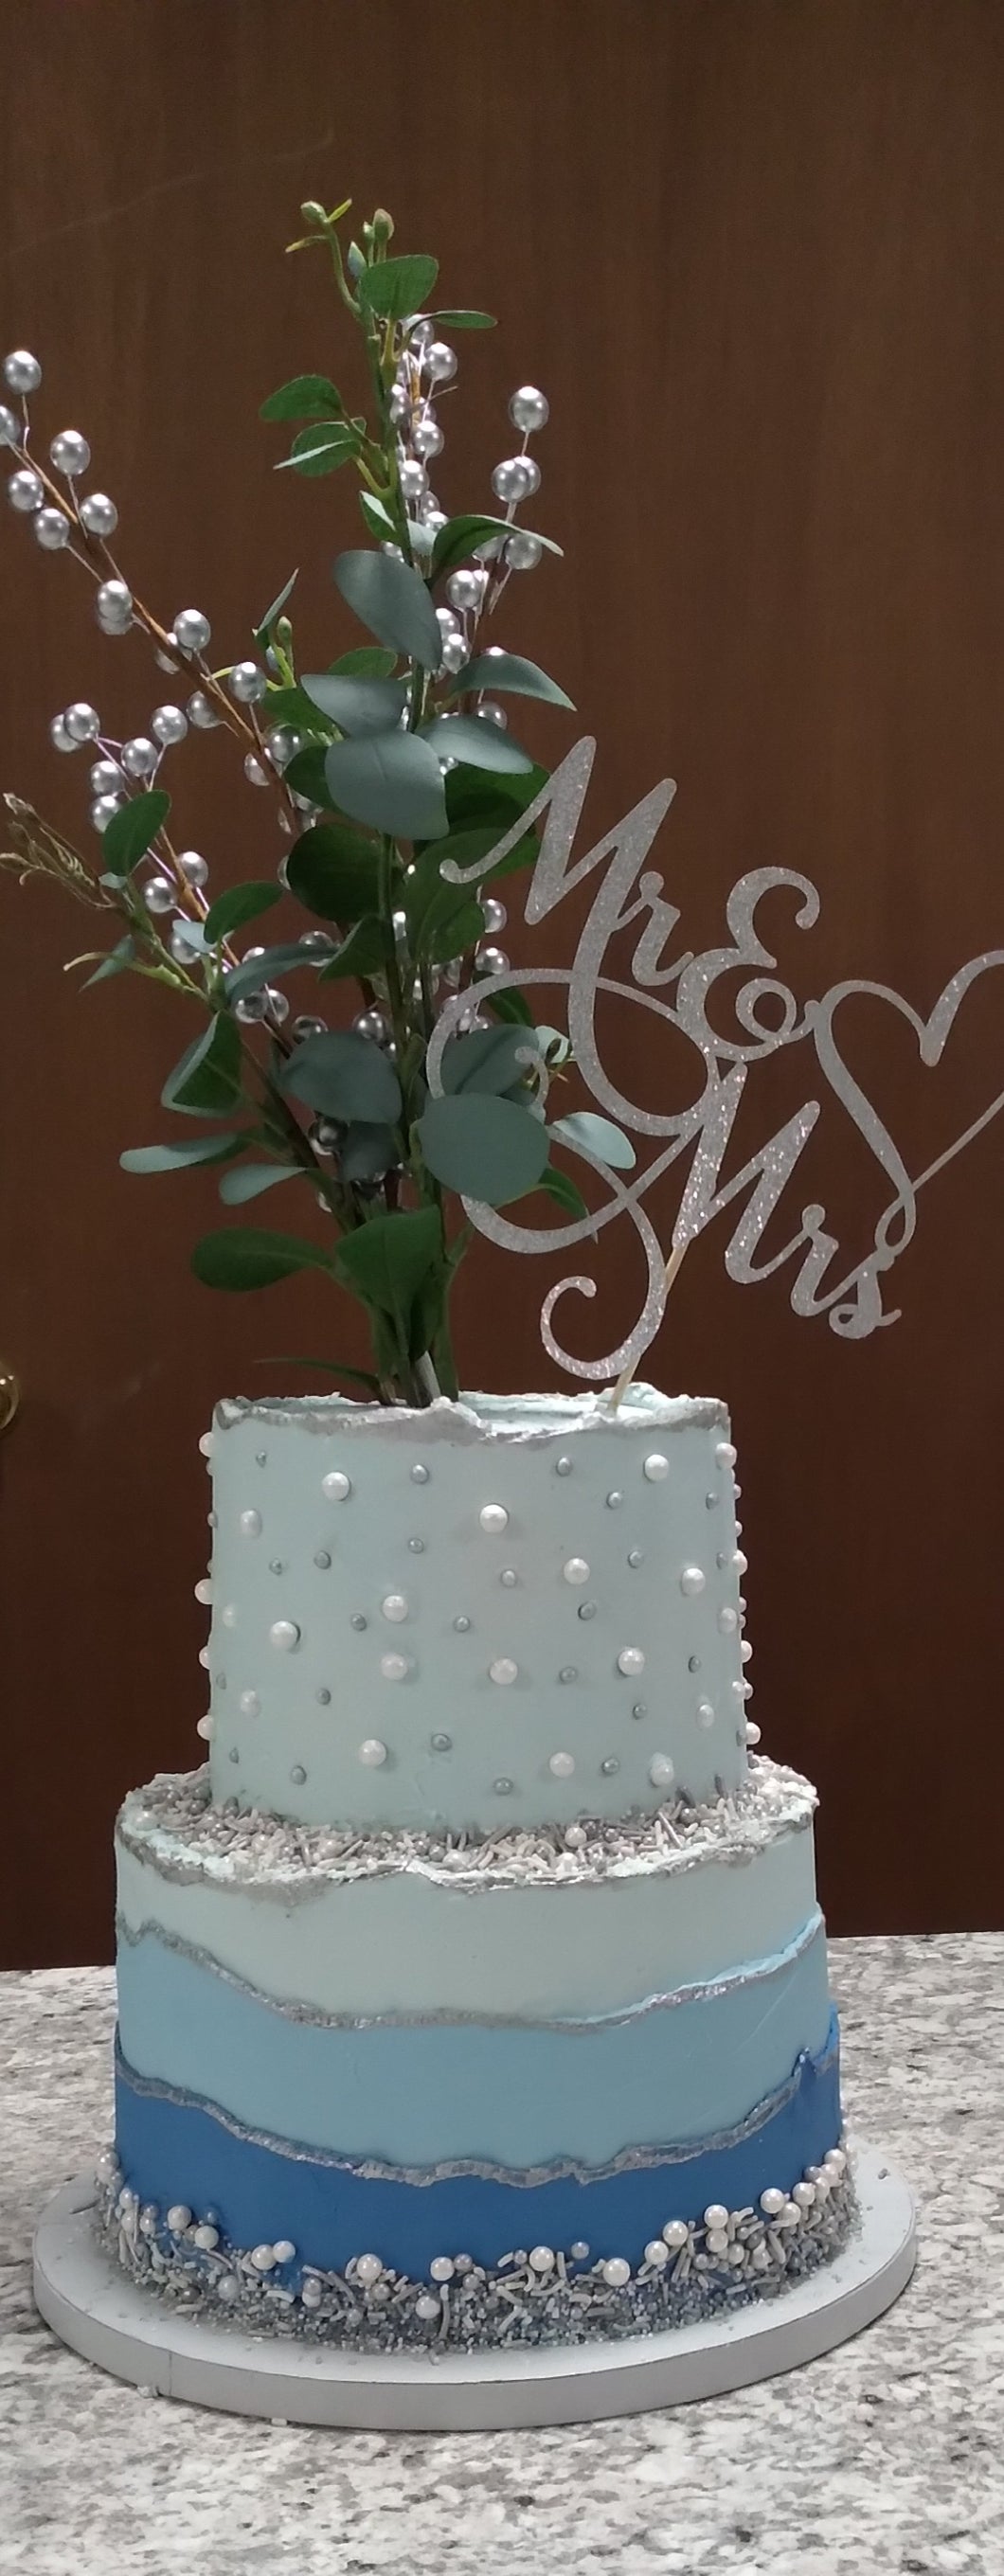 Custom/ Inspiration Cakes - Blue and Silver Ombre Wedding Cake